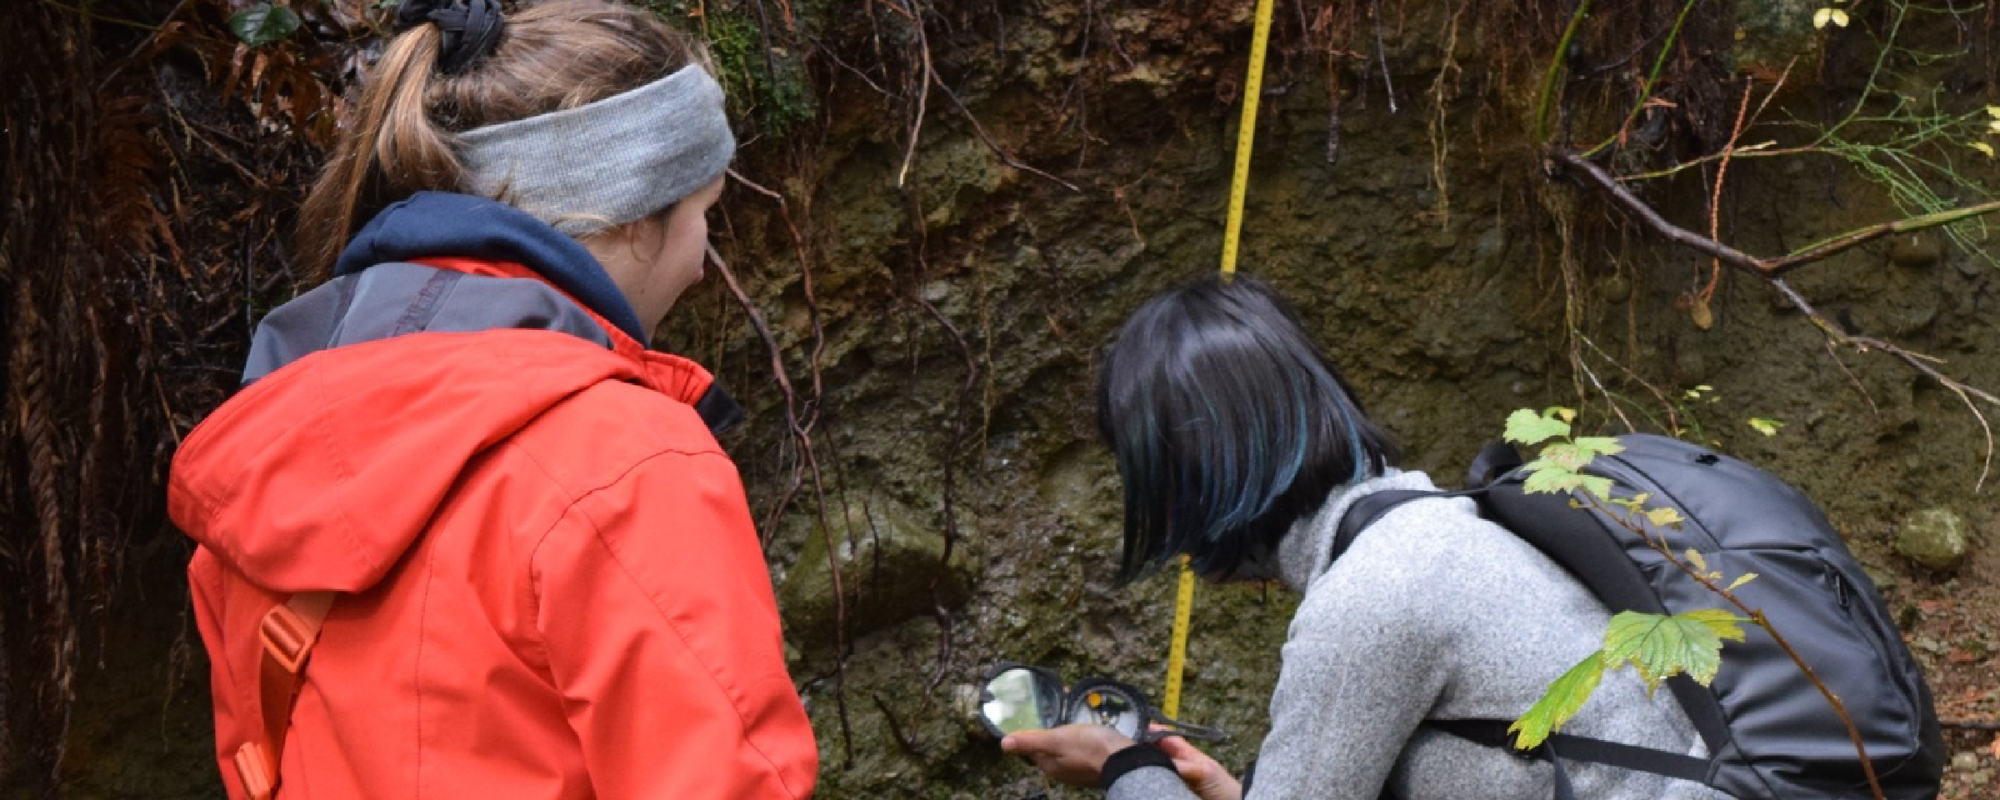 Become a Geoscientist or Agrologist with our Physical Geography Major